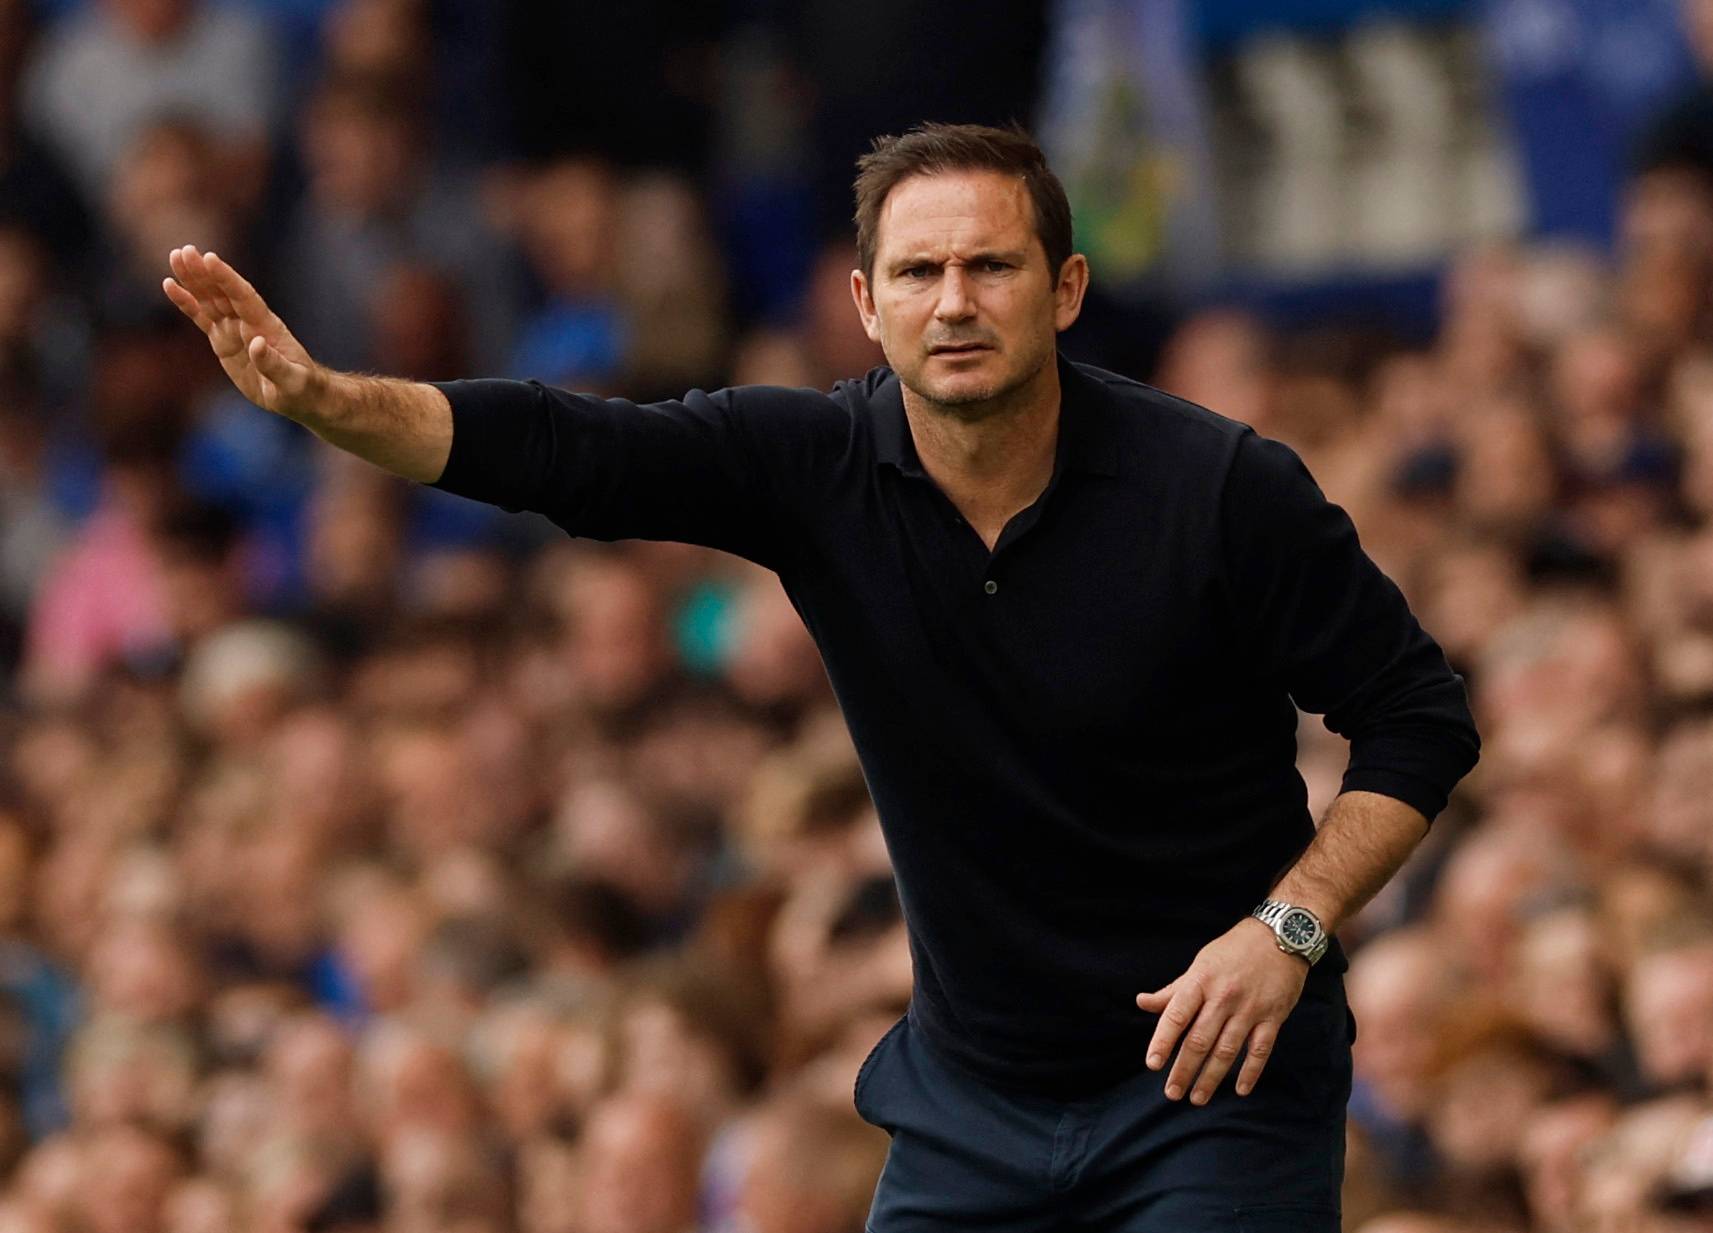 Everton manager Frank Lampard looking very focused on the touchline